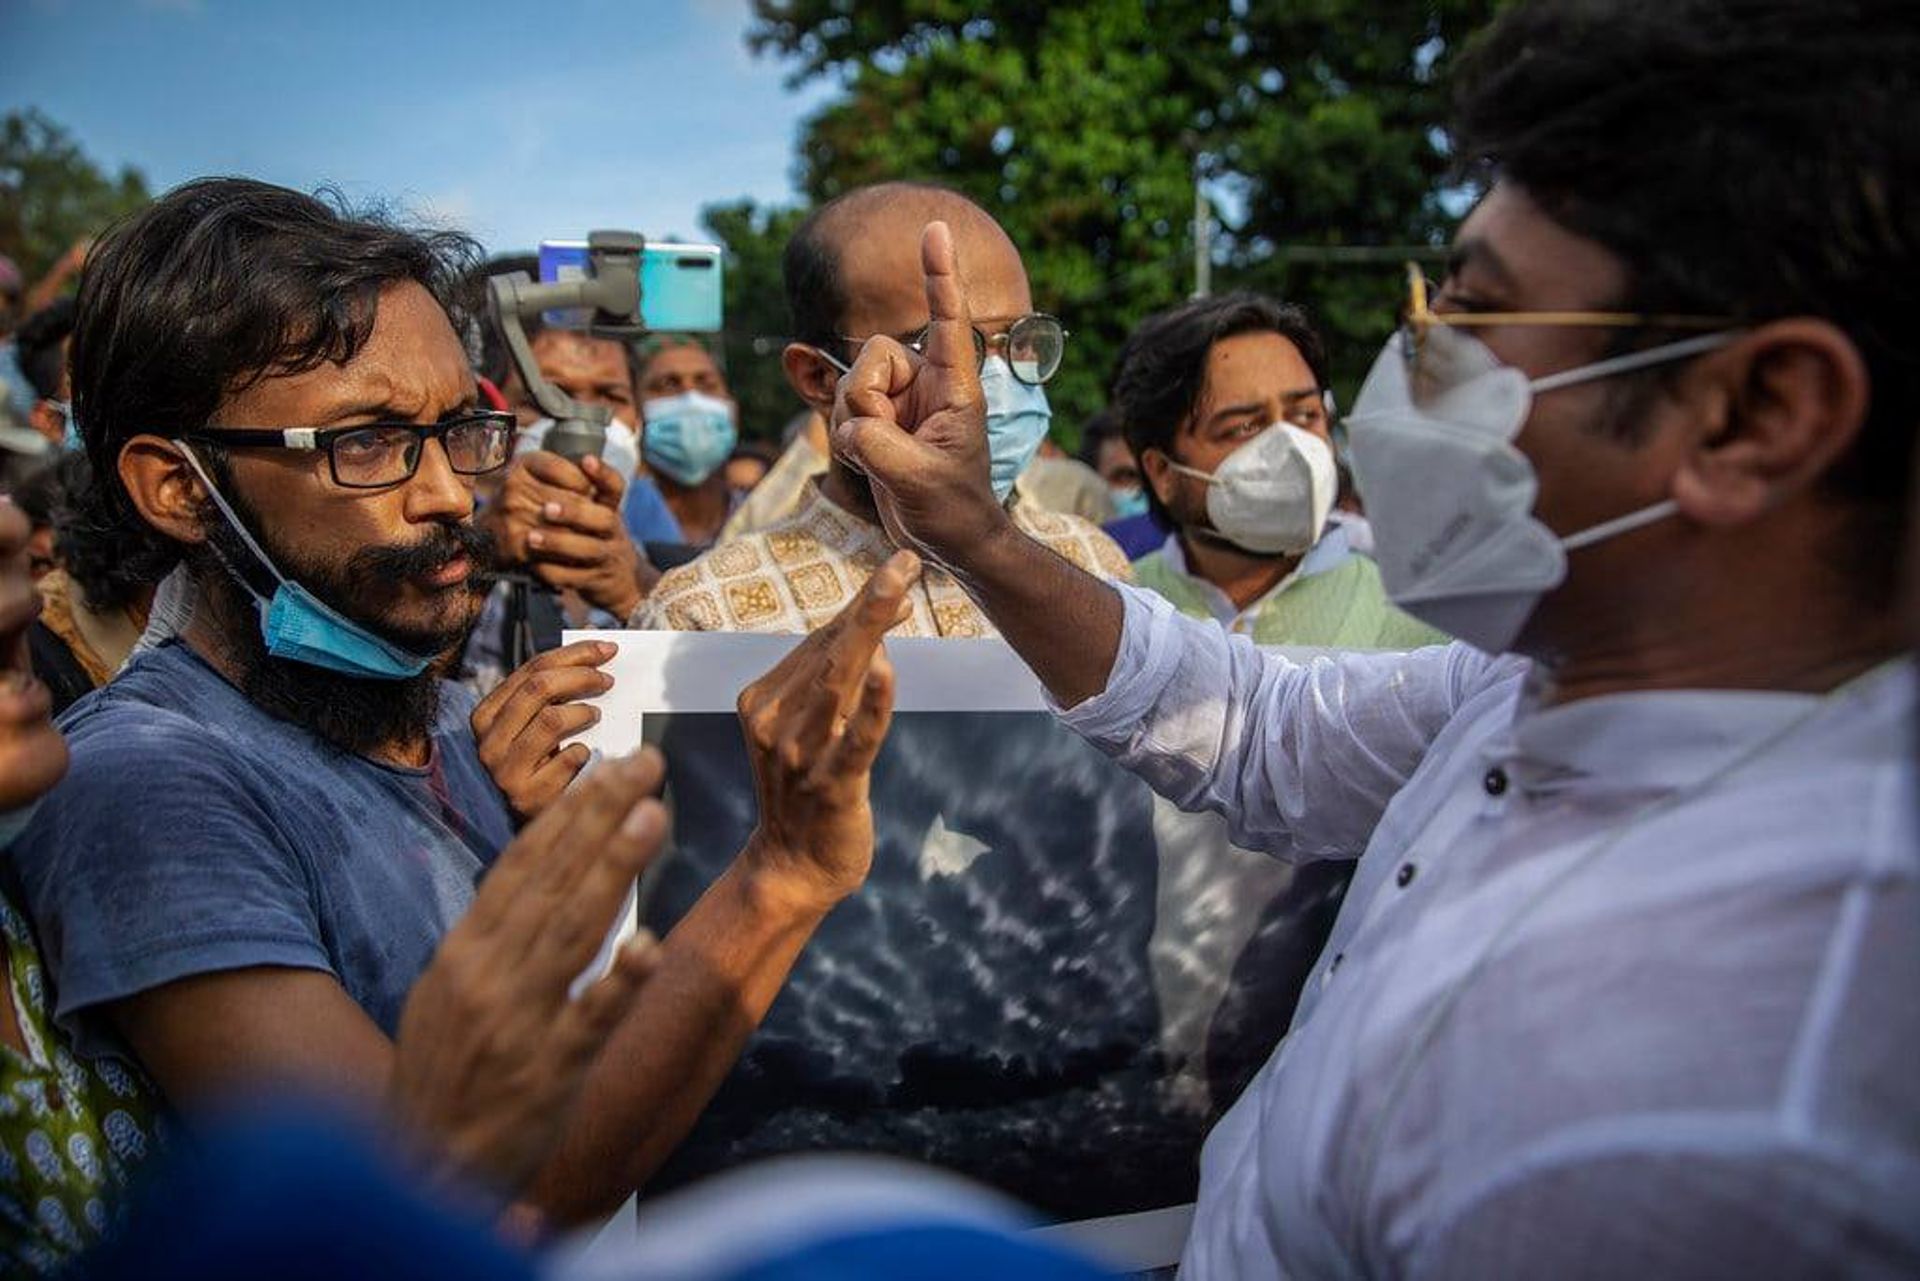 Dhaka city councillor Hasibur Rahman Manik (right), in an altercation with Uddin Ahmed (left), the co-director of a protest performance which took place in Dhaka University on 4 September. © Habibul Haque / Drik